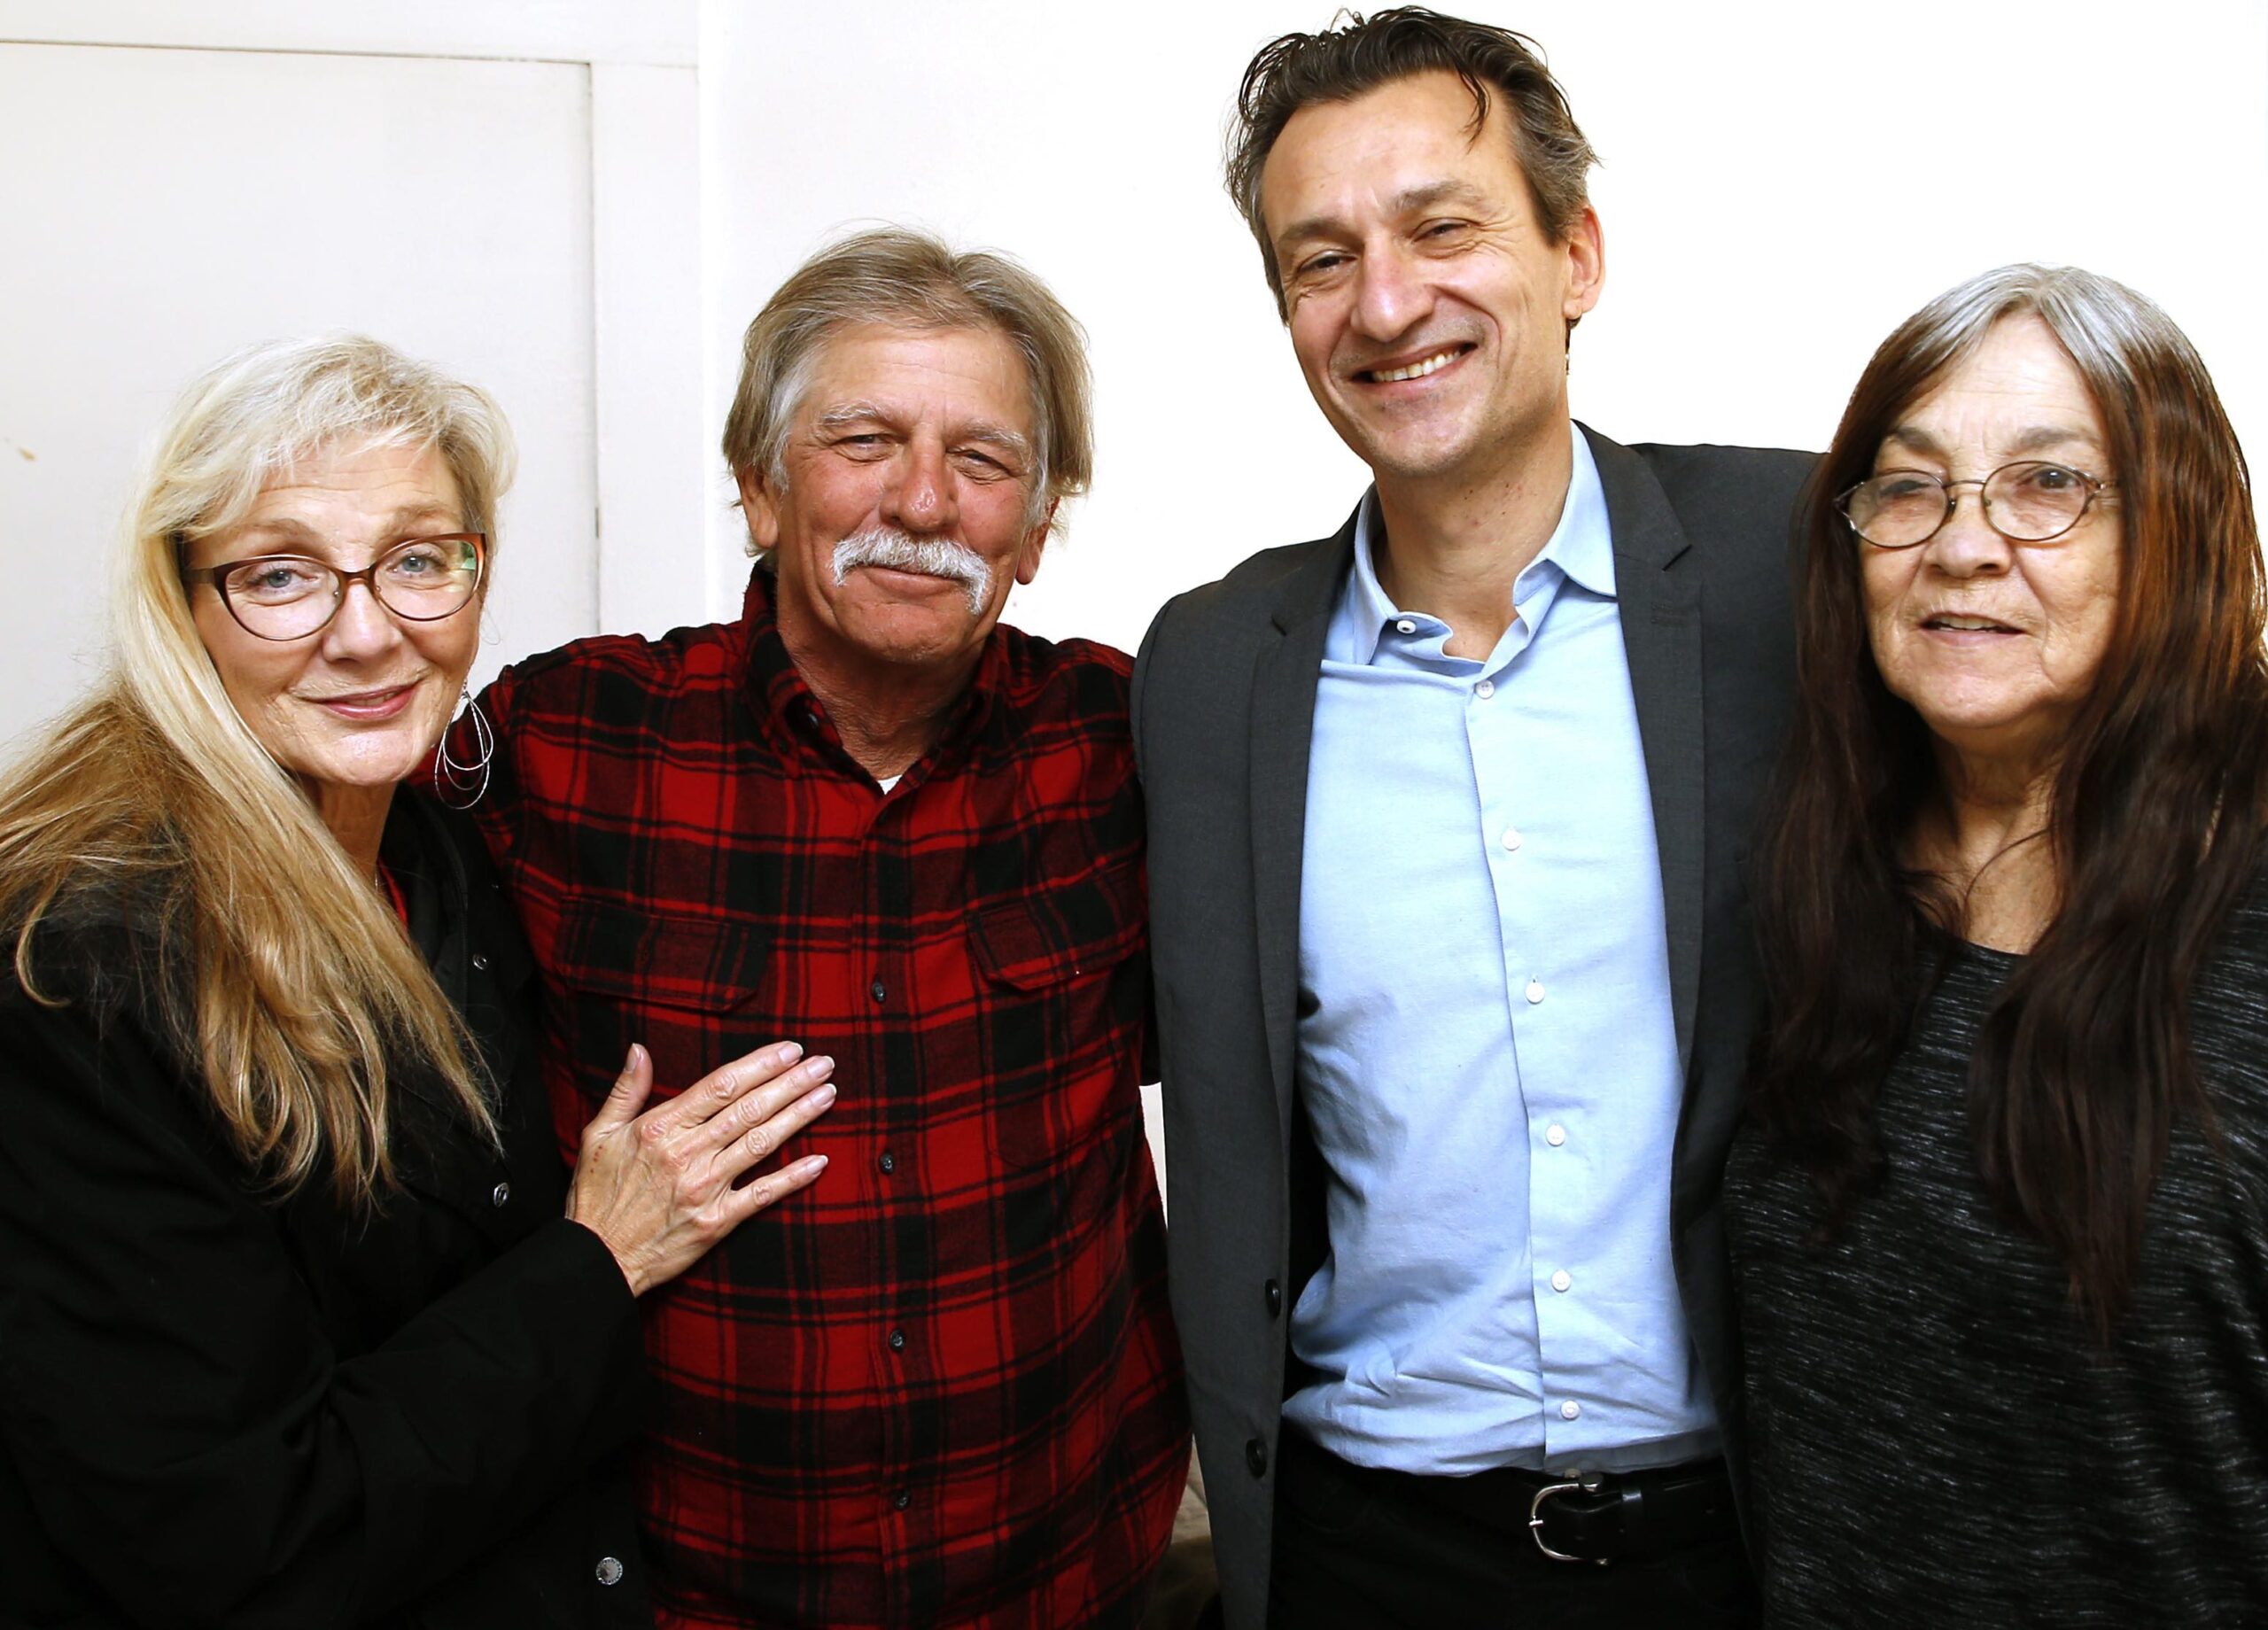 Steven Mark Chaney at his east Dallas home in December 2018. Pictured (L-R): local counsel Julie Lesser, Steven Chaney, Innocence Project Director of Strategic Litigation Chris Fabricant and Chaney's wife, Lenora Chaney. (Image: Ron Jenkins)